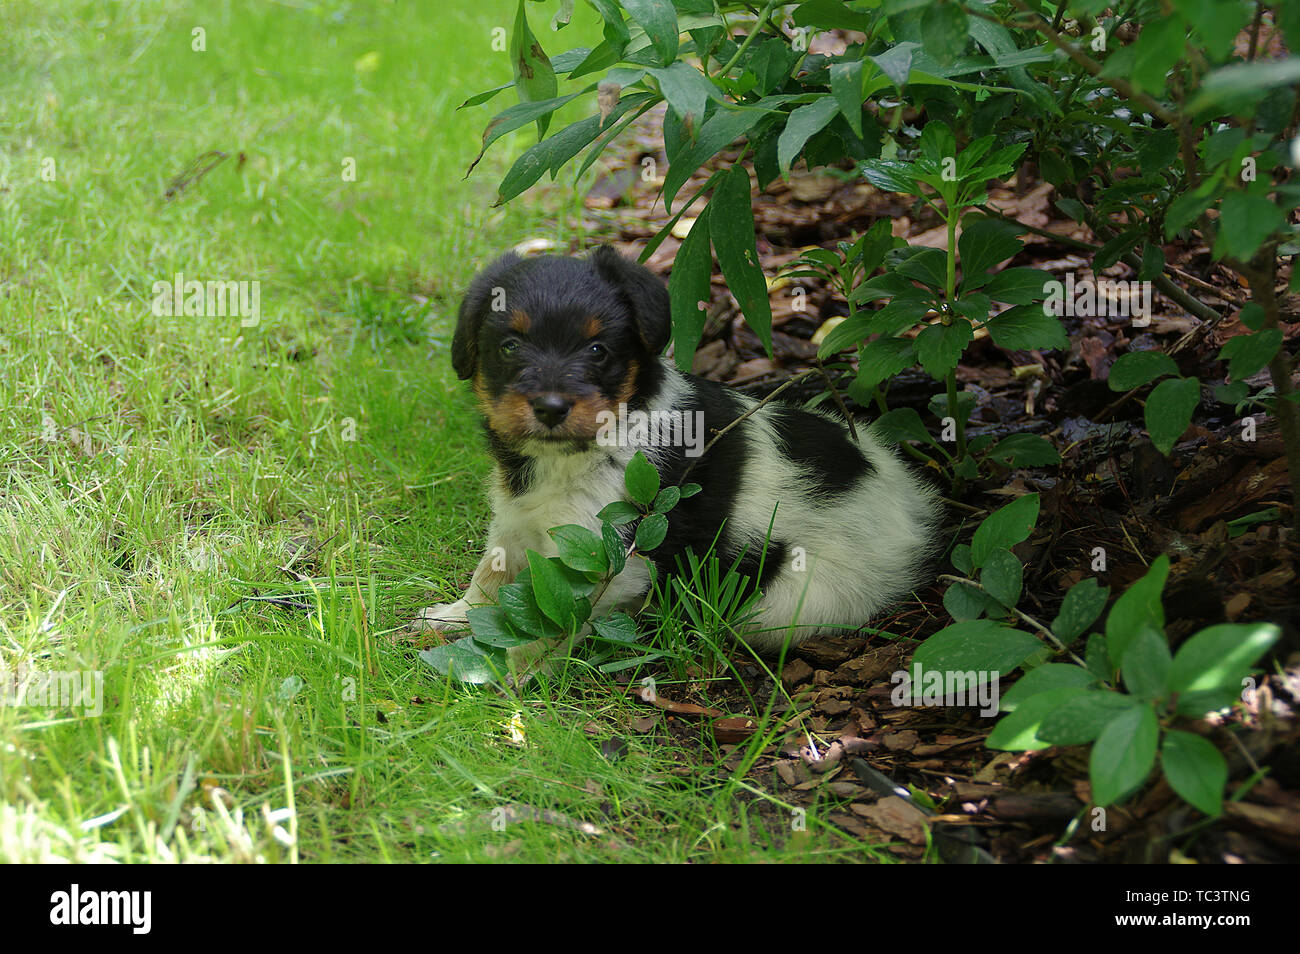 The puppy is sitting on the grass. The portrait of little dog gets to know the world with curiosity. Stock Photo